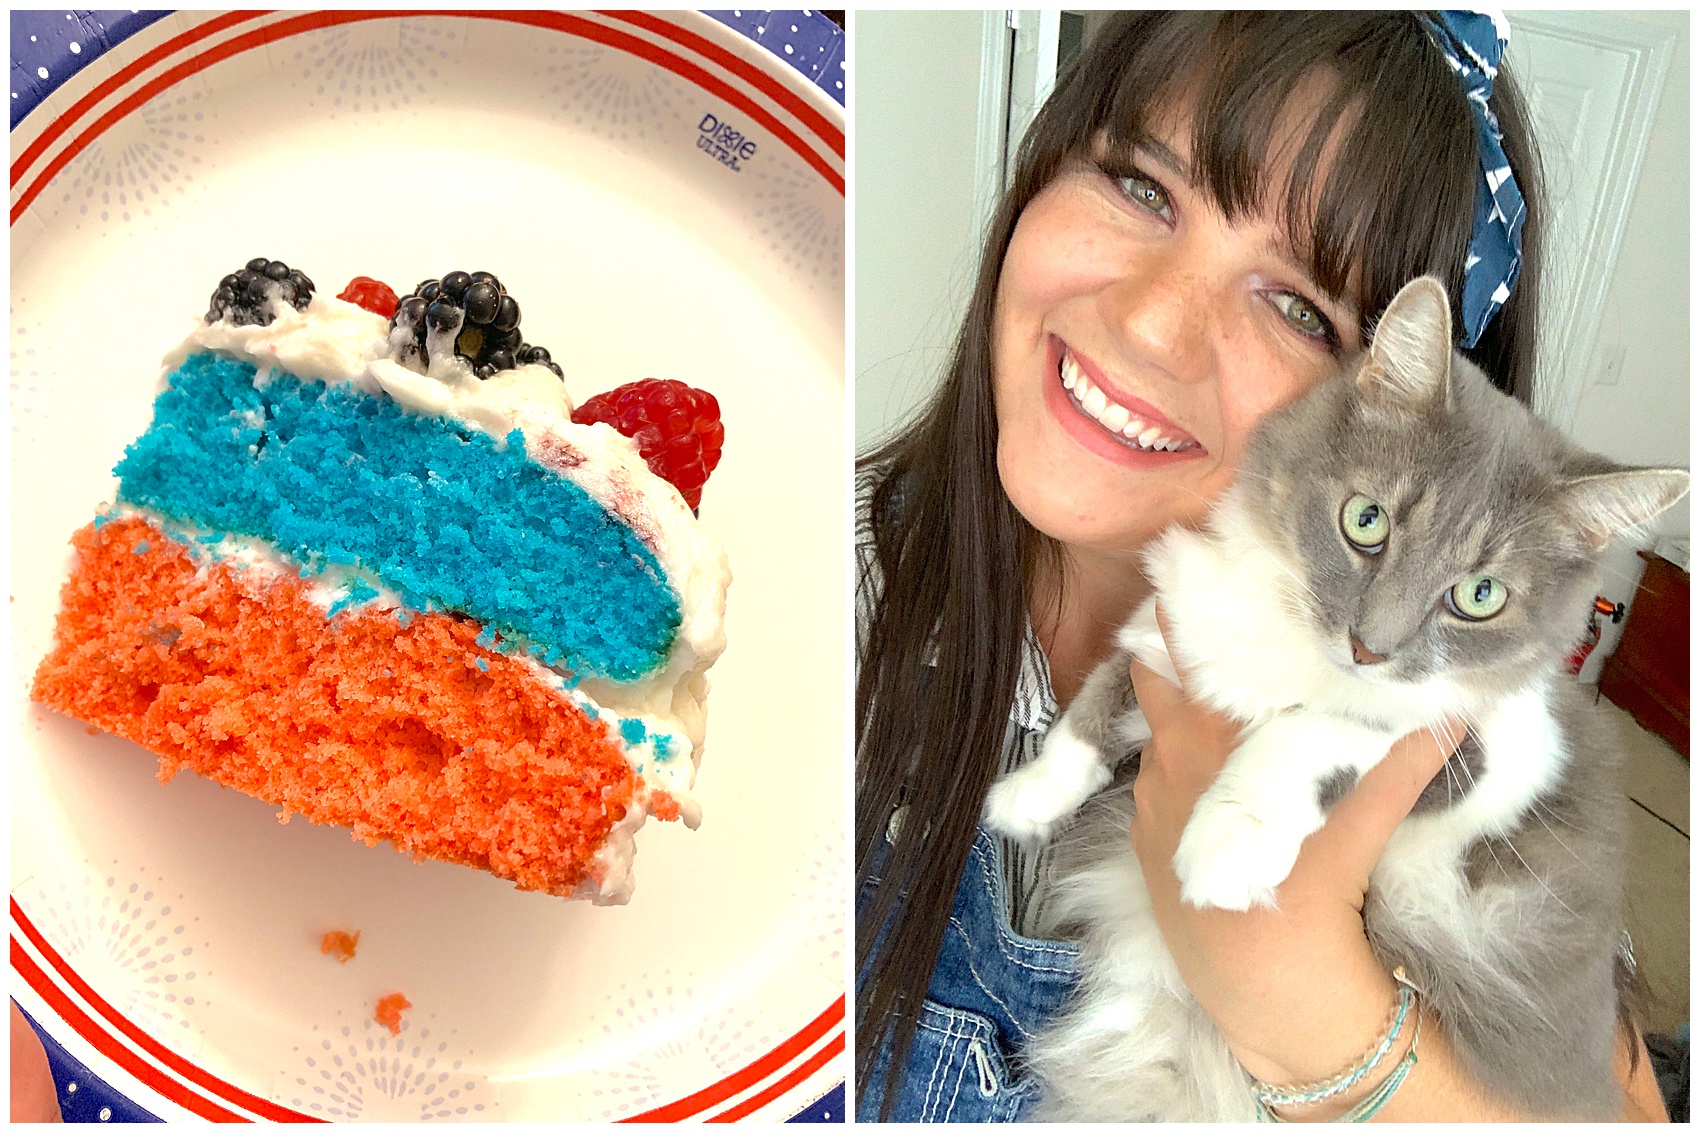 vegan 4th of july cake and a gray kitty